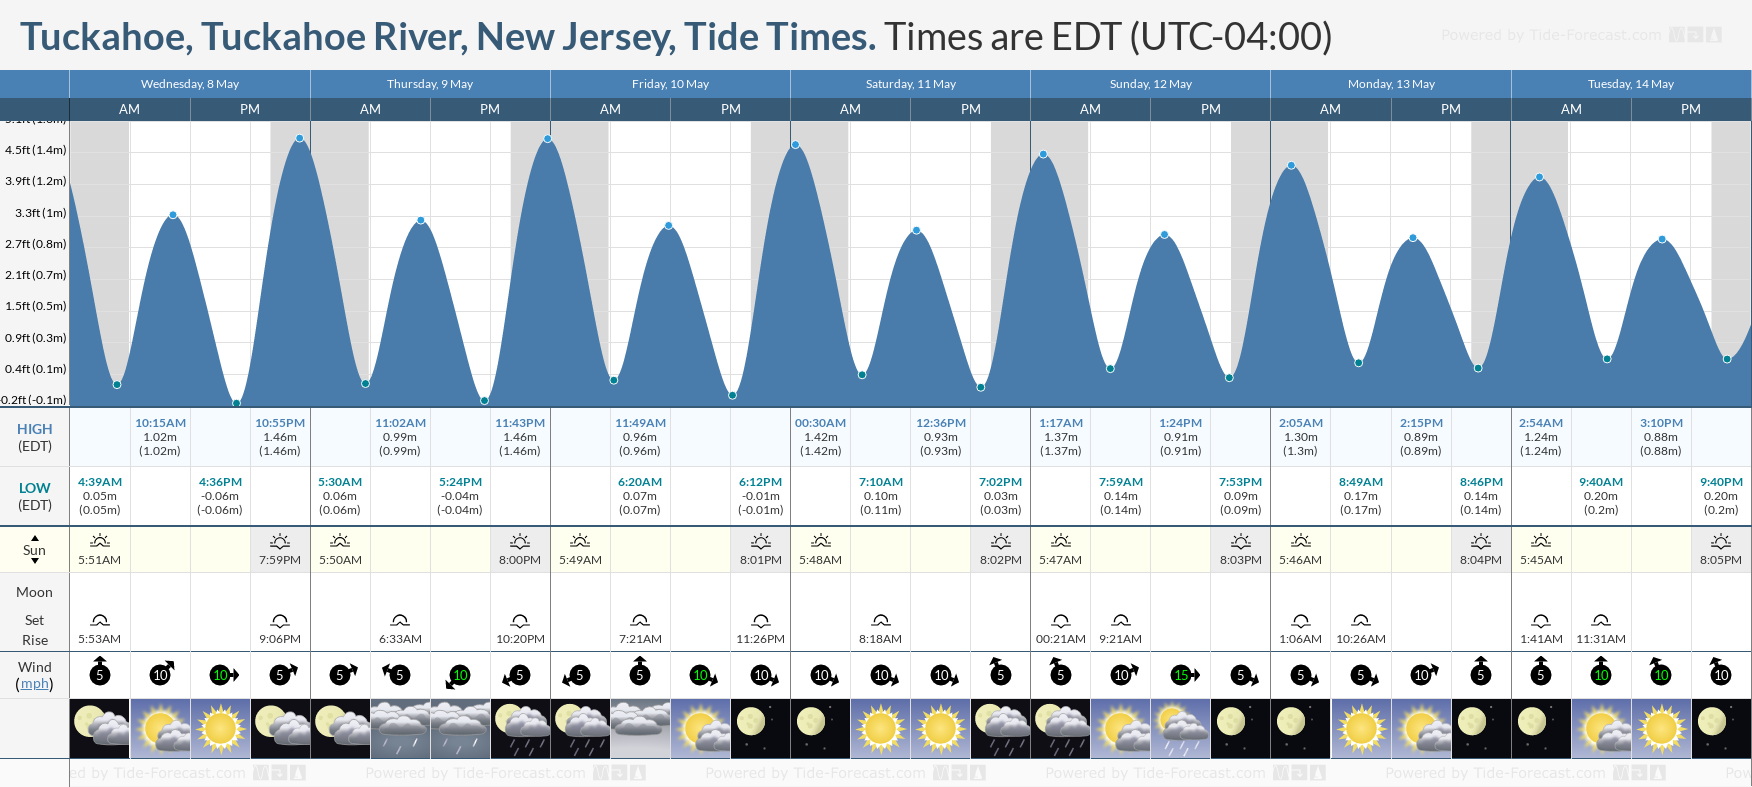 Tuckahoe, Tuckahoe River, New Jersey Tide Chart including high and low tide tide times for the next 7 days